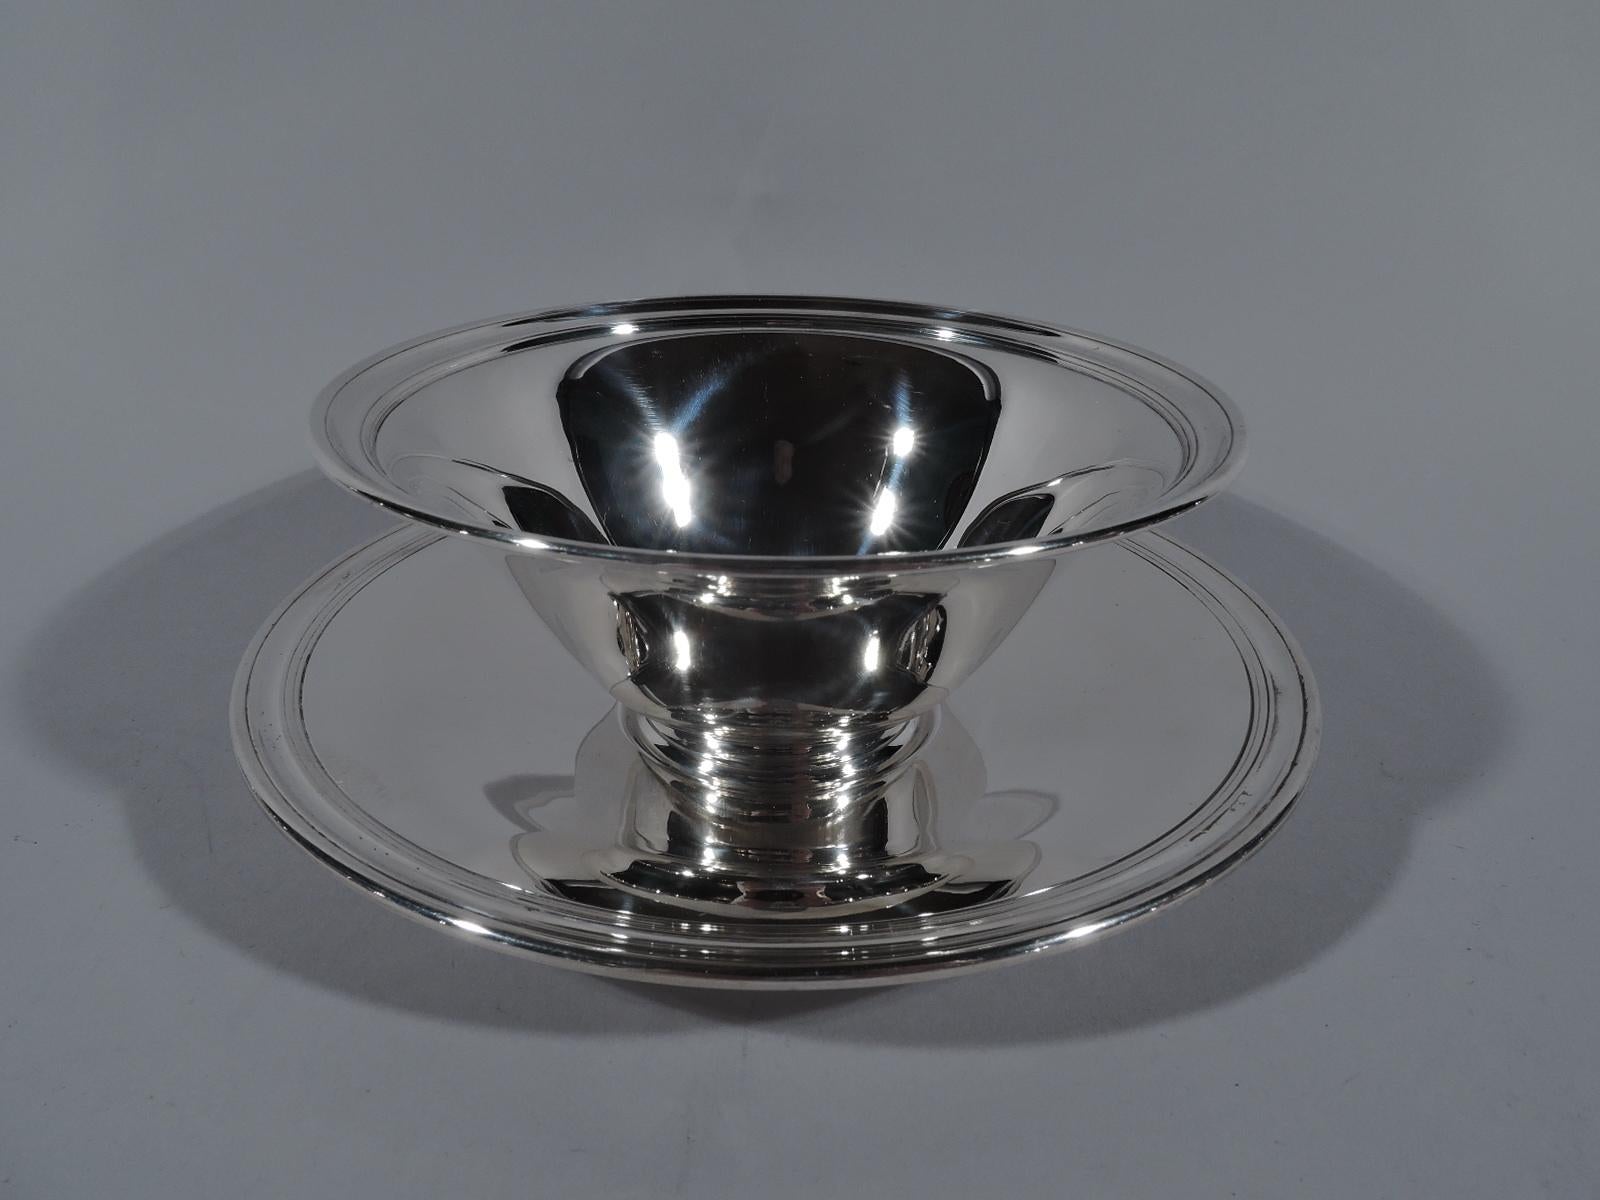 Twelve American modern sterling silver dessert bowls and plates. Made by Tiffany & Co. in New York, circa 1910. This set comprises 12 bowls and 12 plates. Each bowl: Conical with reeded interior rim and short stepped foot. Each plate: Well with wide